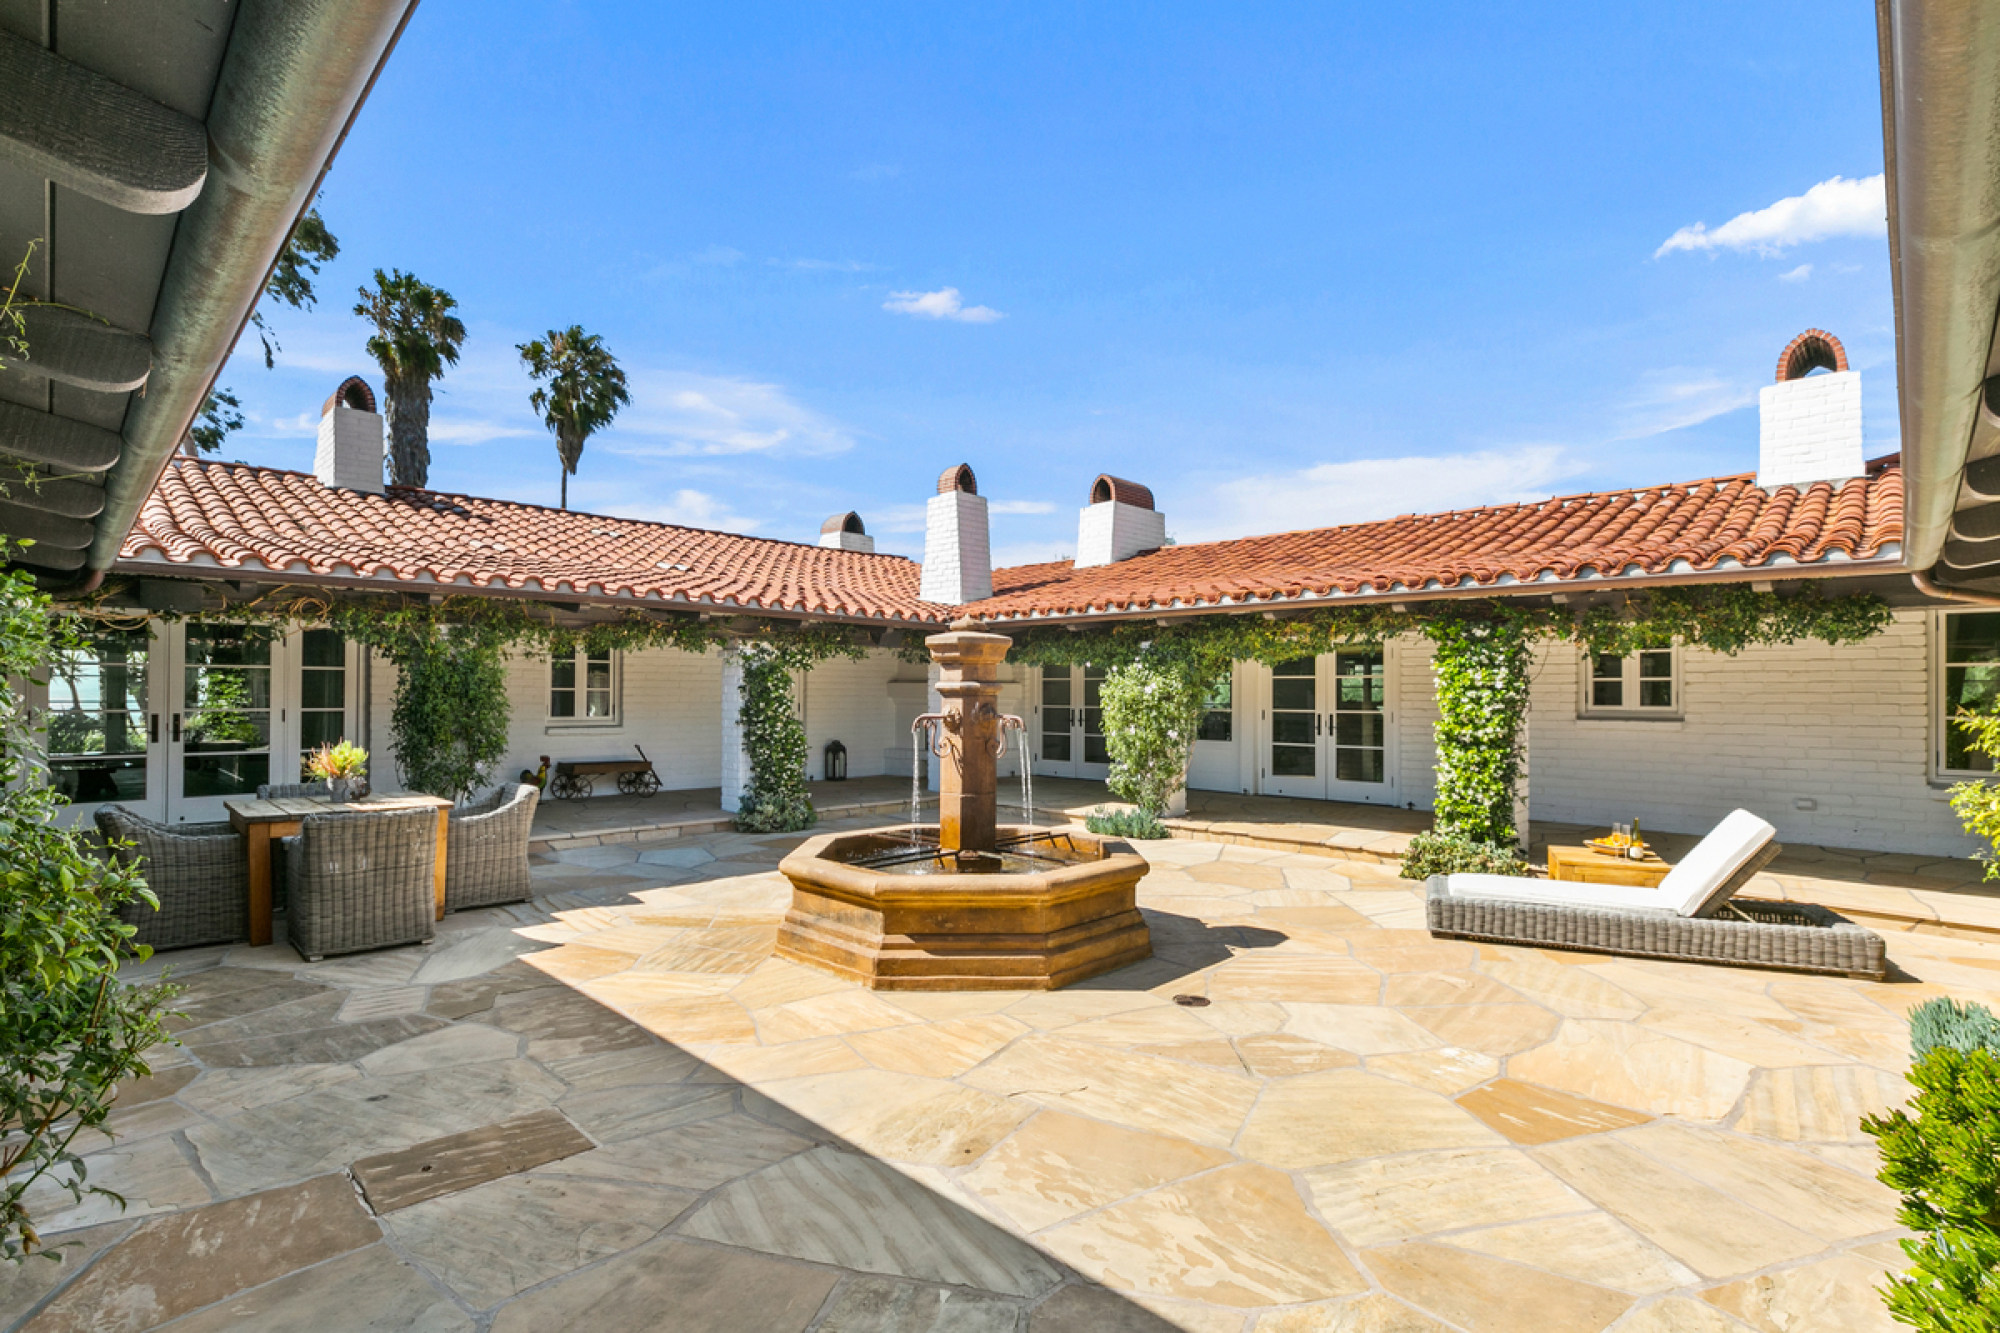 The courtyard and fountain at Sandra Bullock’s compound has a classic Spanish feel. Photo: ZenHouse Collective